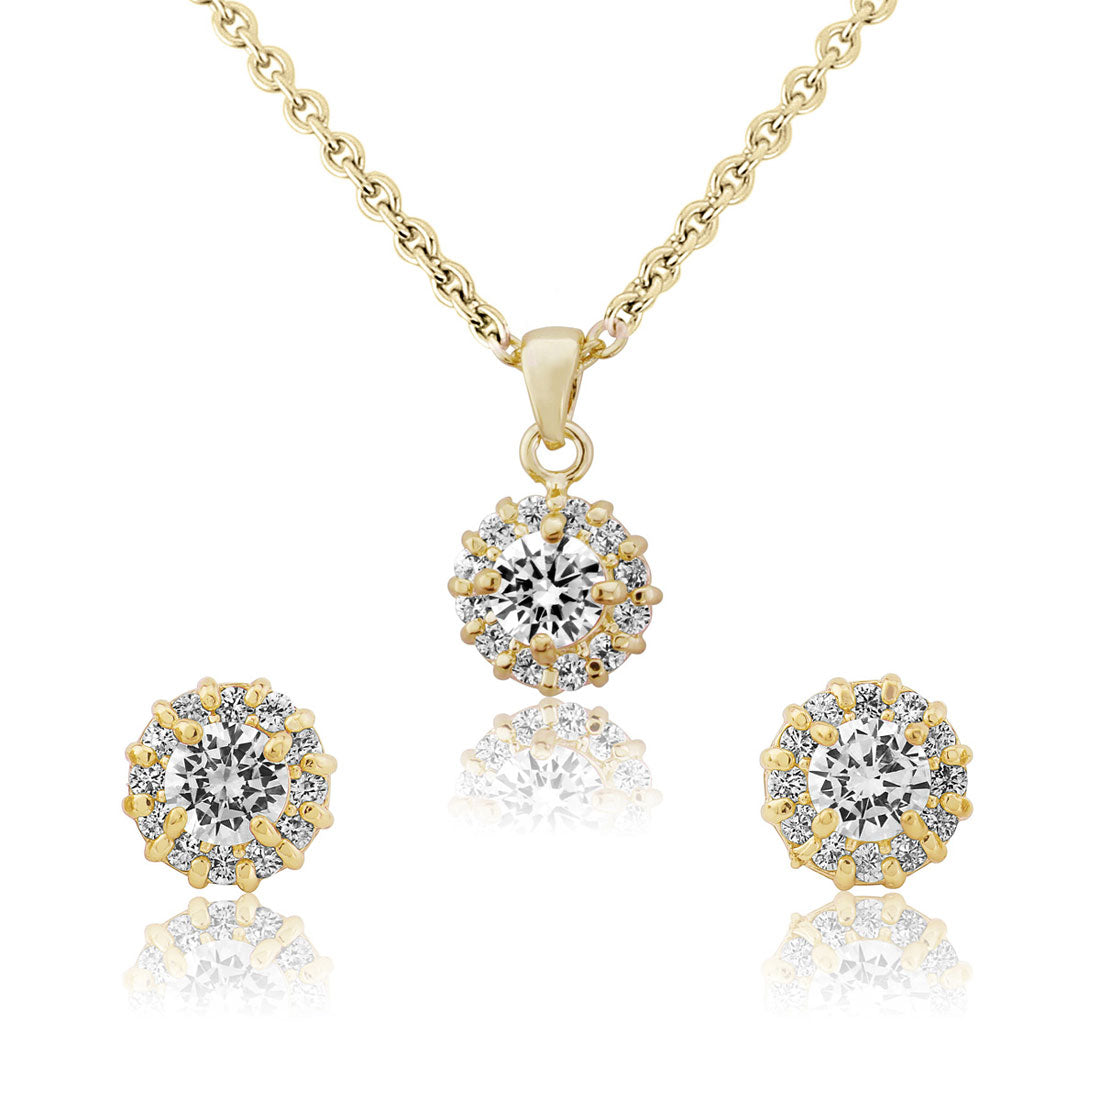 Golden Starlet Cubic Zirconia Jewellery Set with stud earrings and pendant